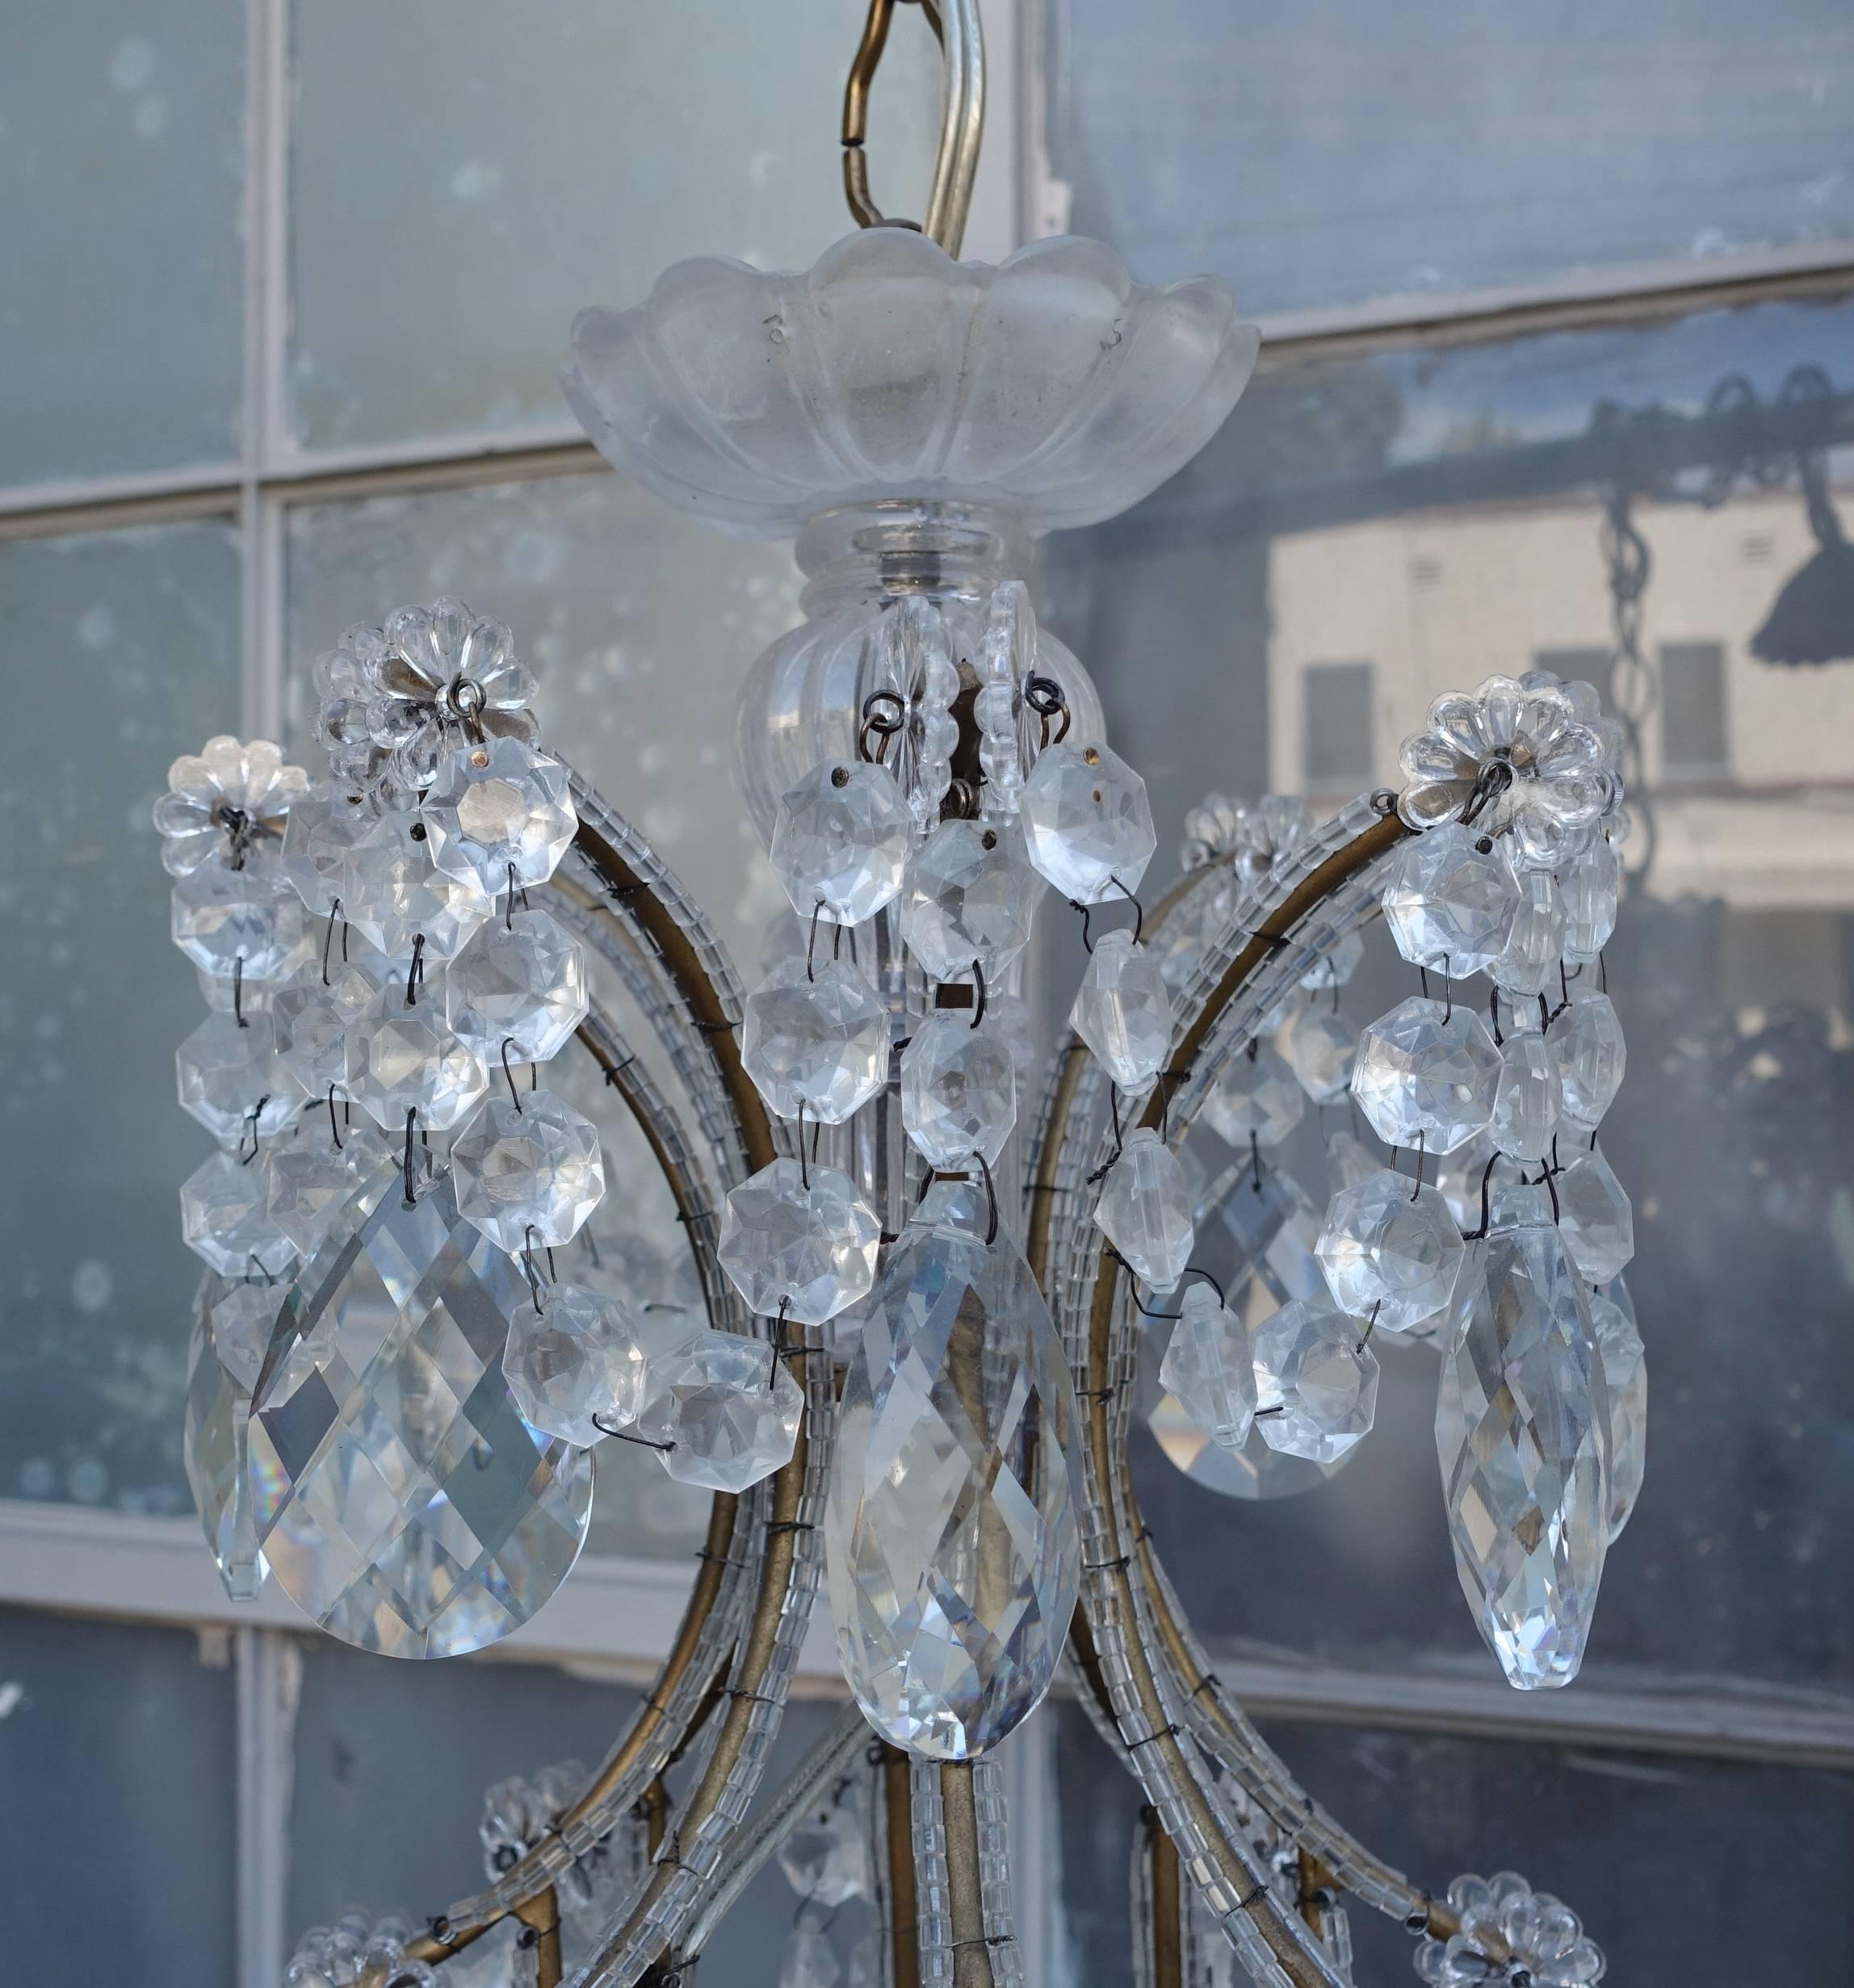 Eight-light Italian crystal beaded chandelier with giltwood bobeches. Newly rewired with drip wax candle covers. Chain and canopy included.